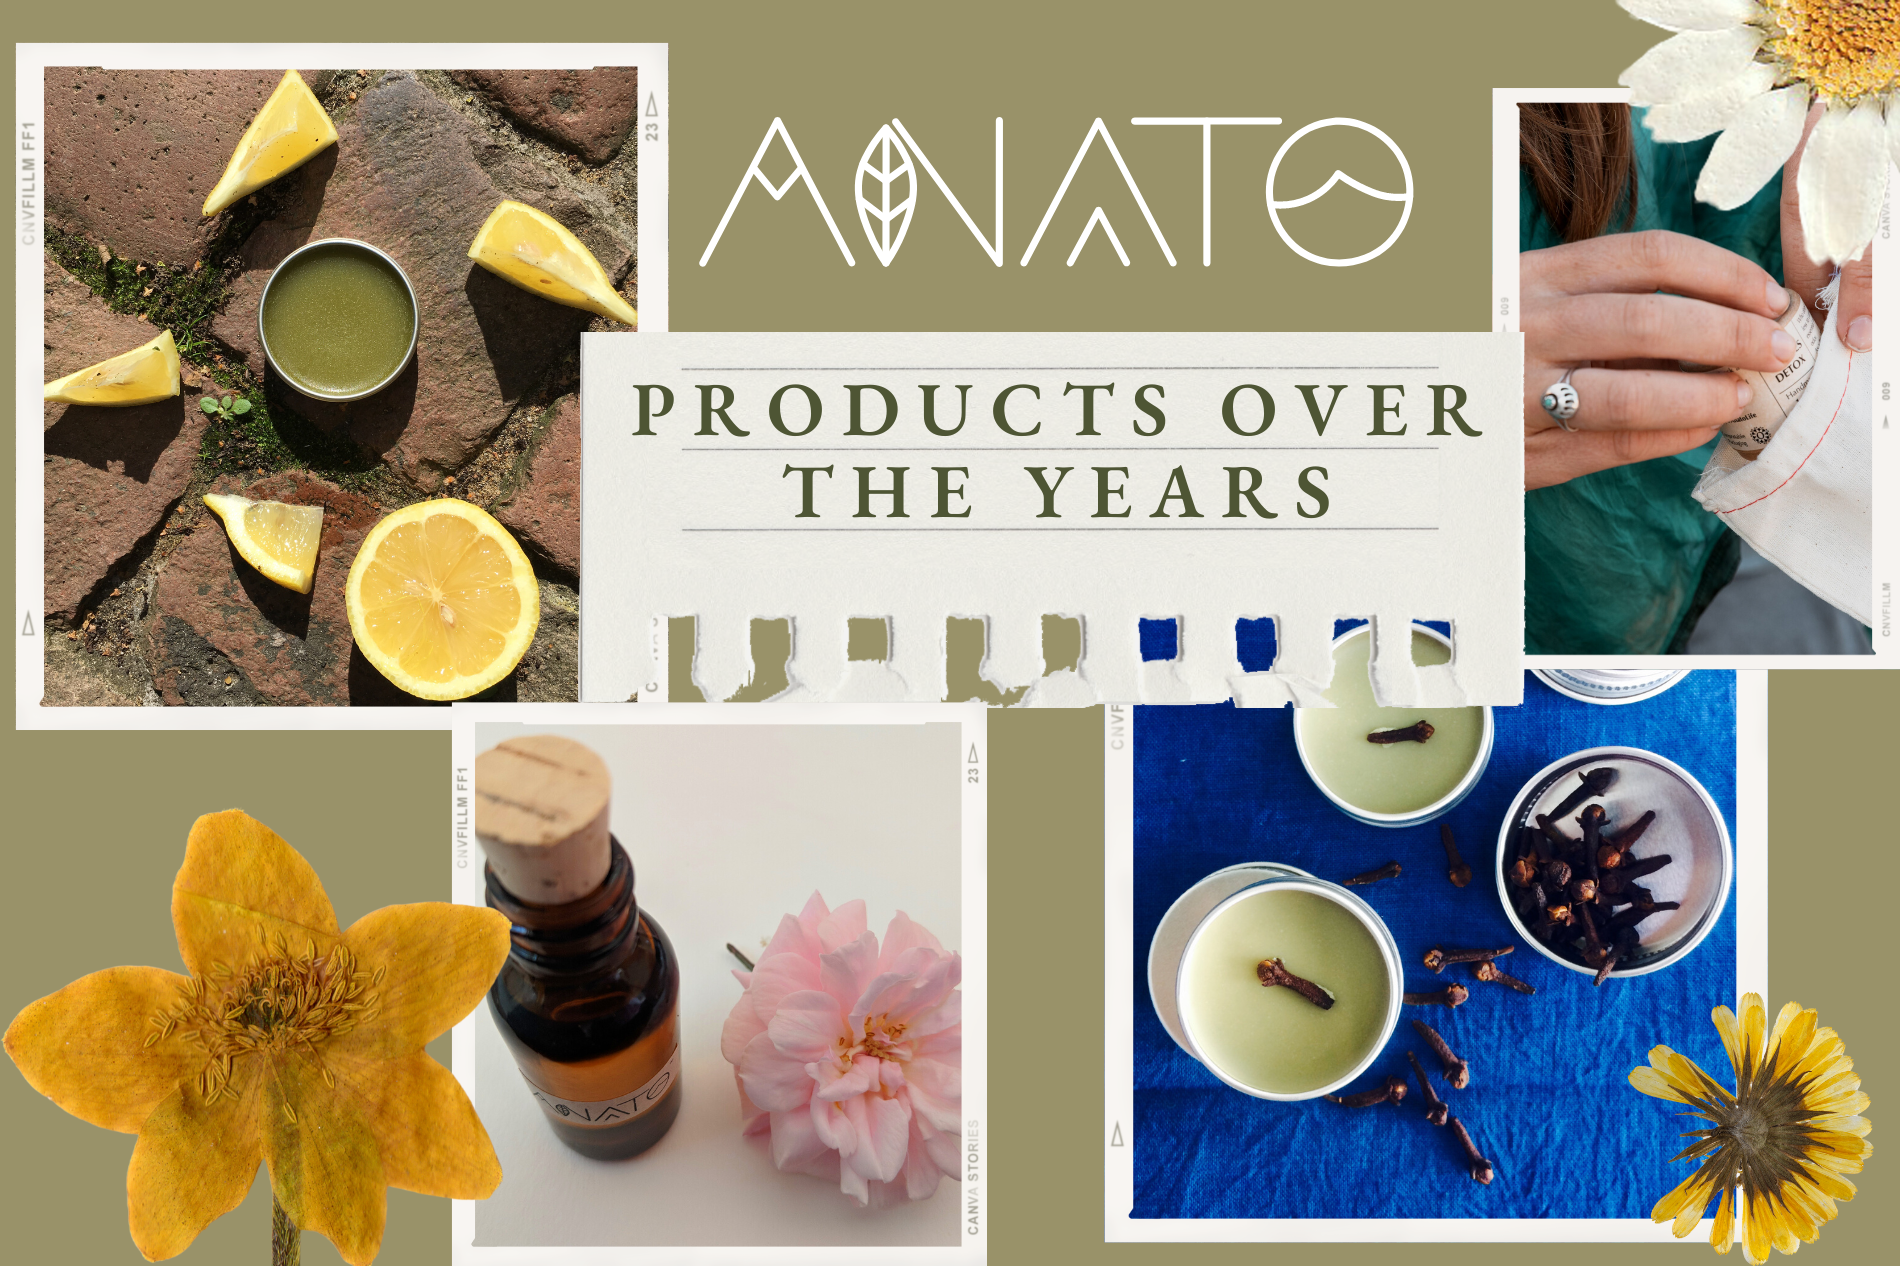 Anato Products over the years